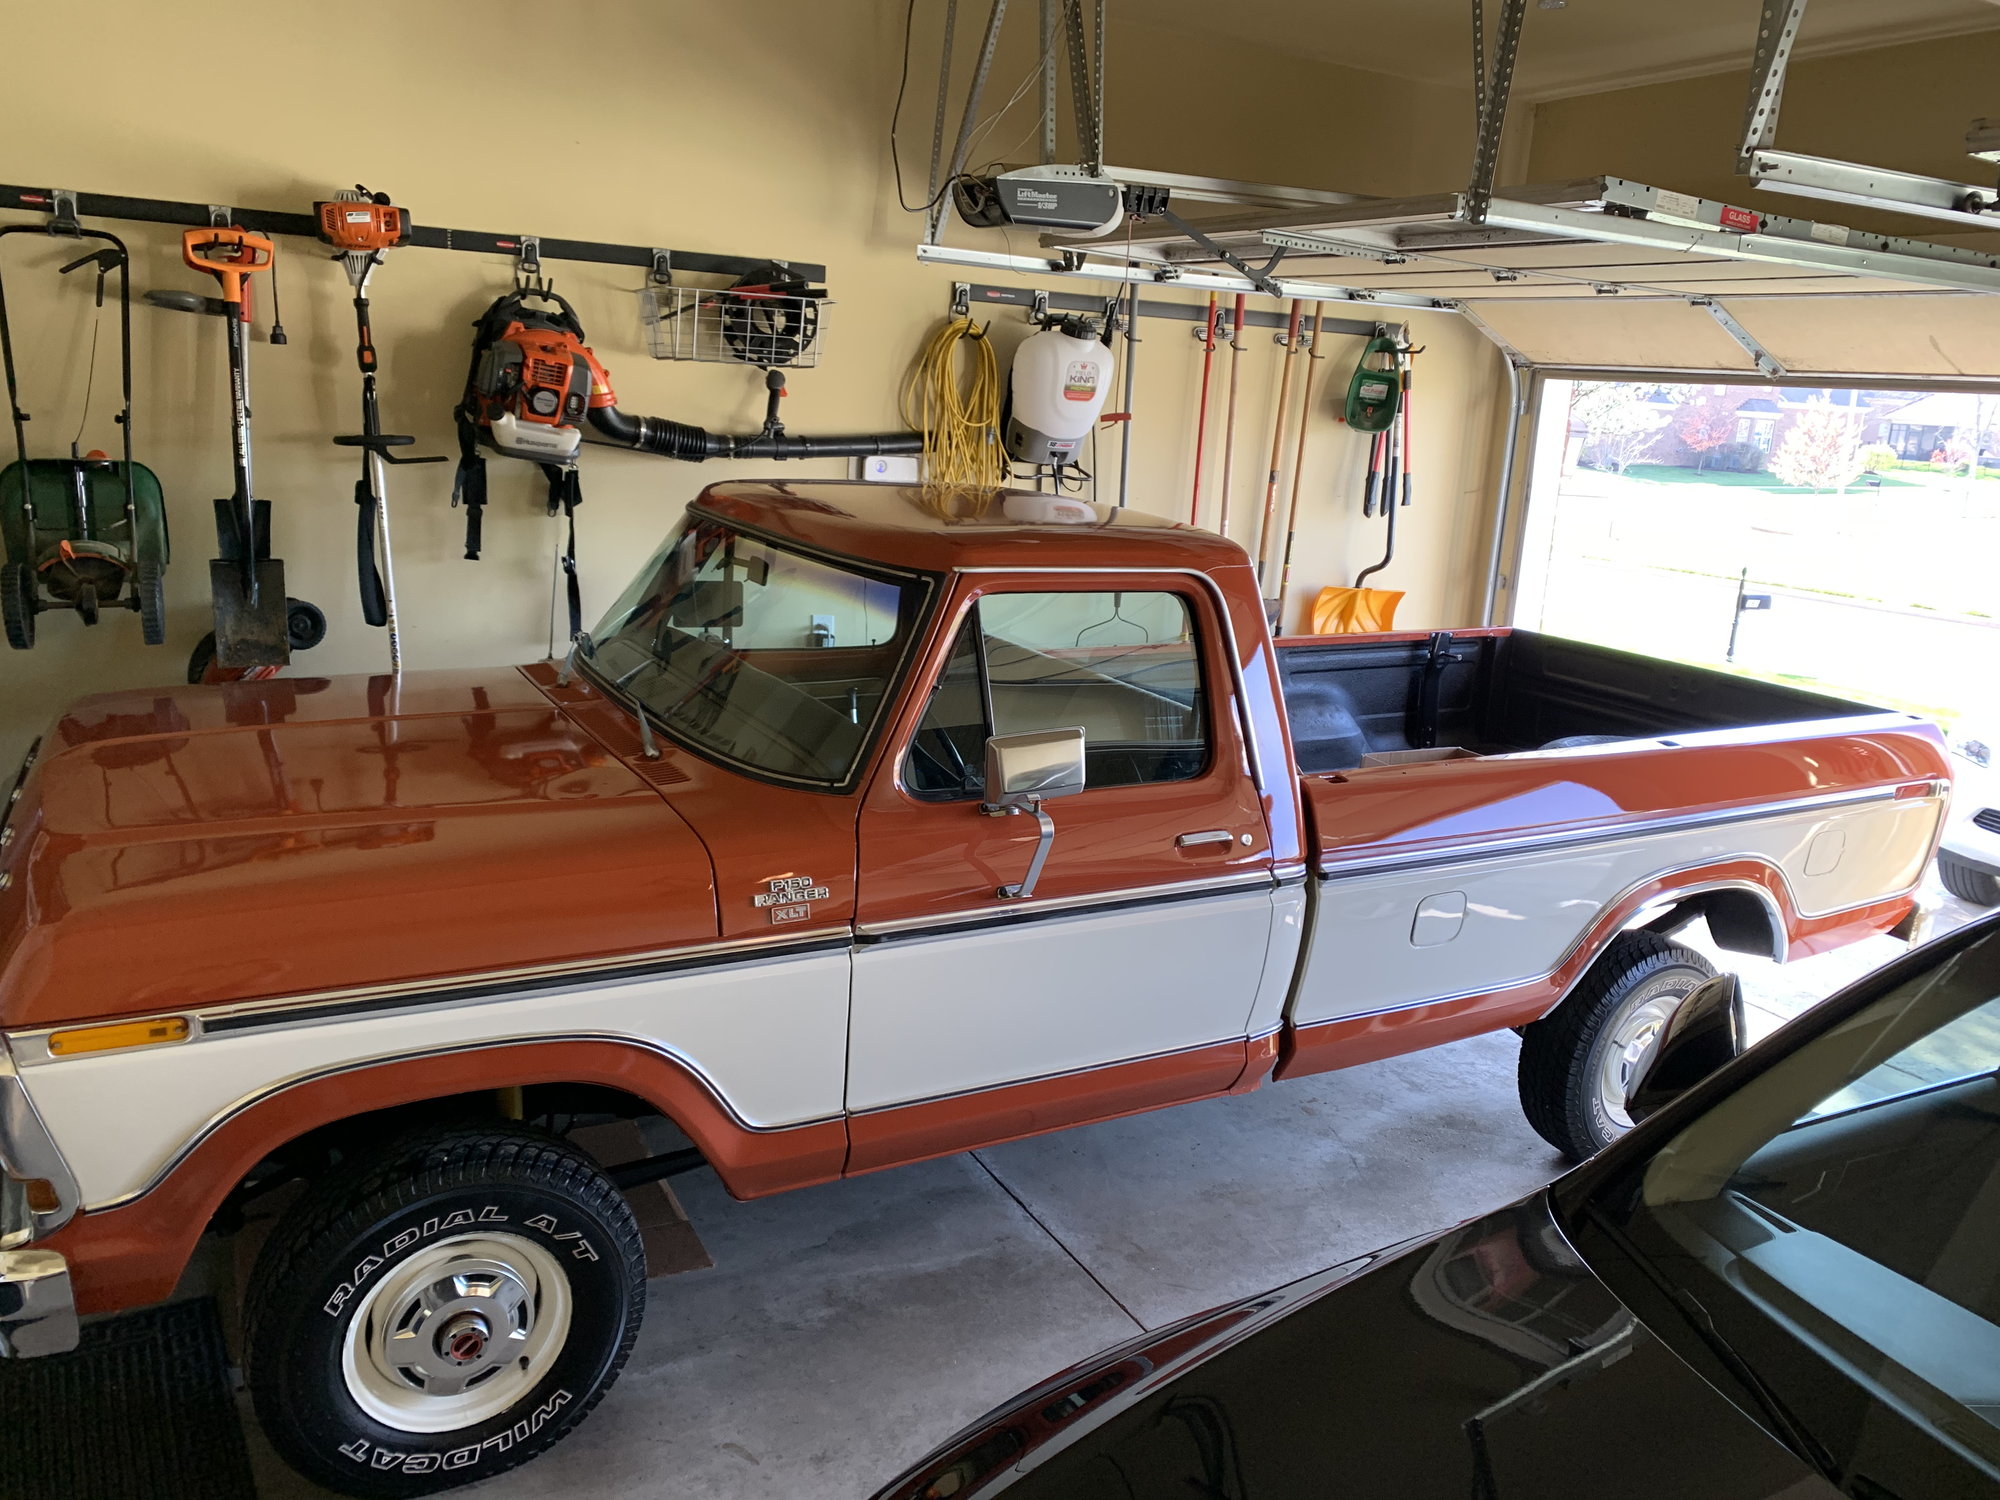 78 f150 front 4x4 rotor removal HELP!!! - Ford Truck Enthusiasts Forums